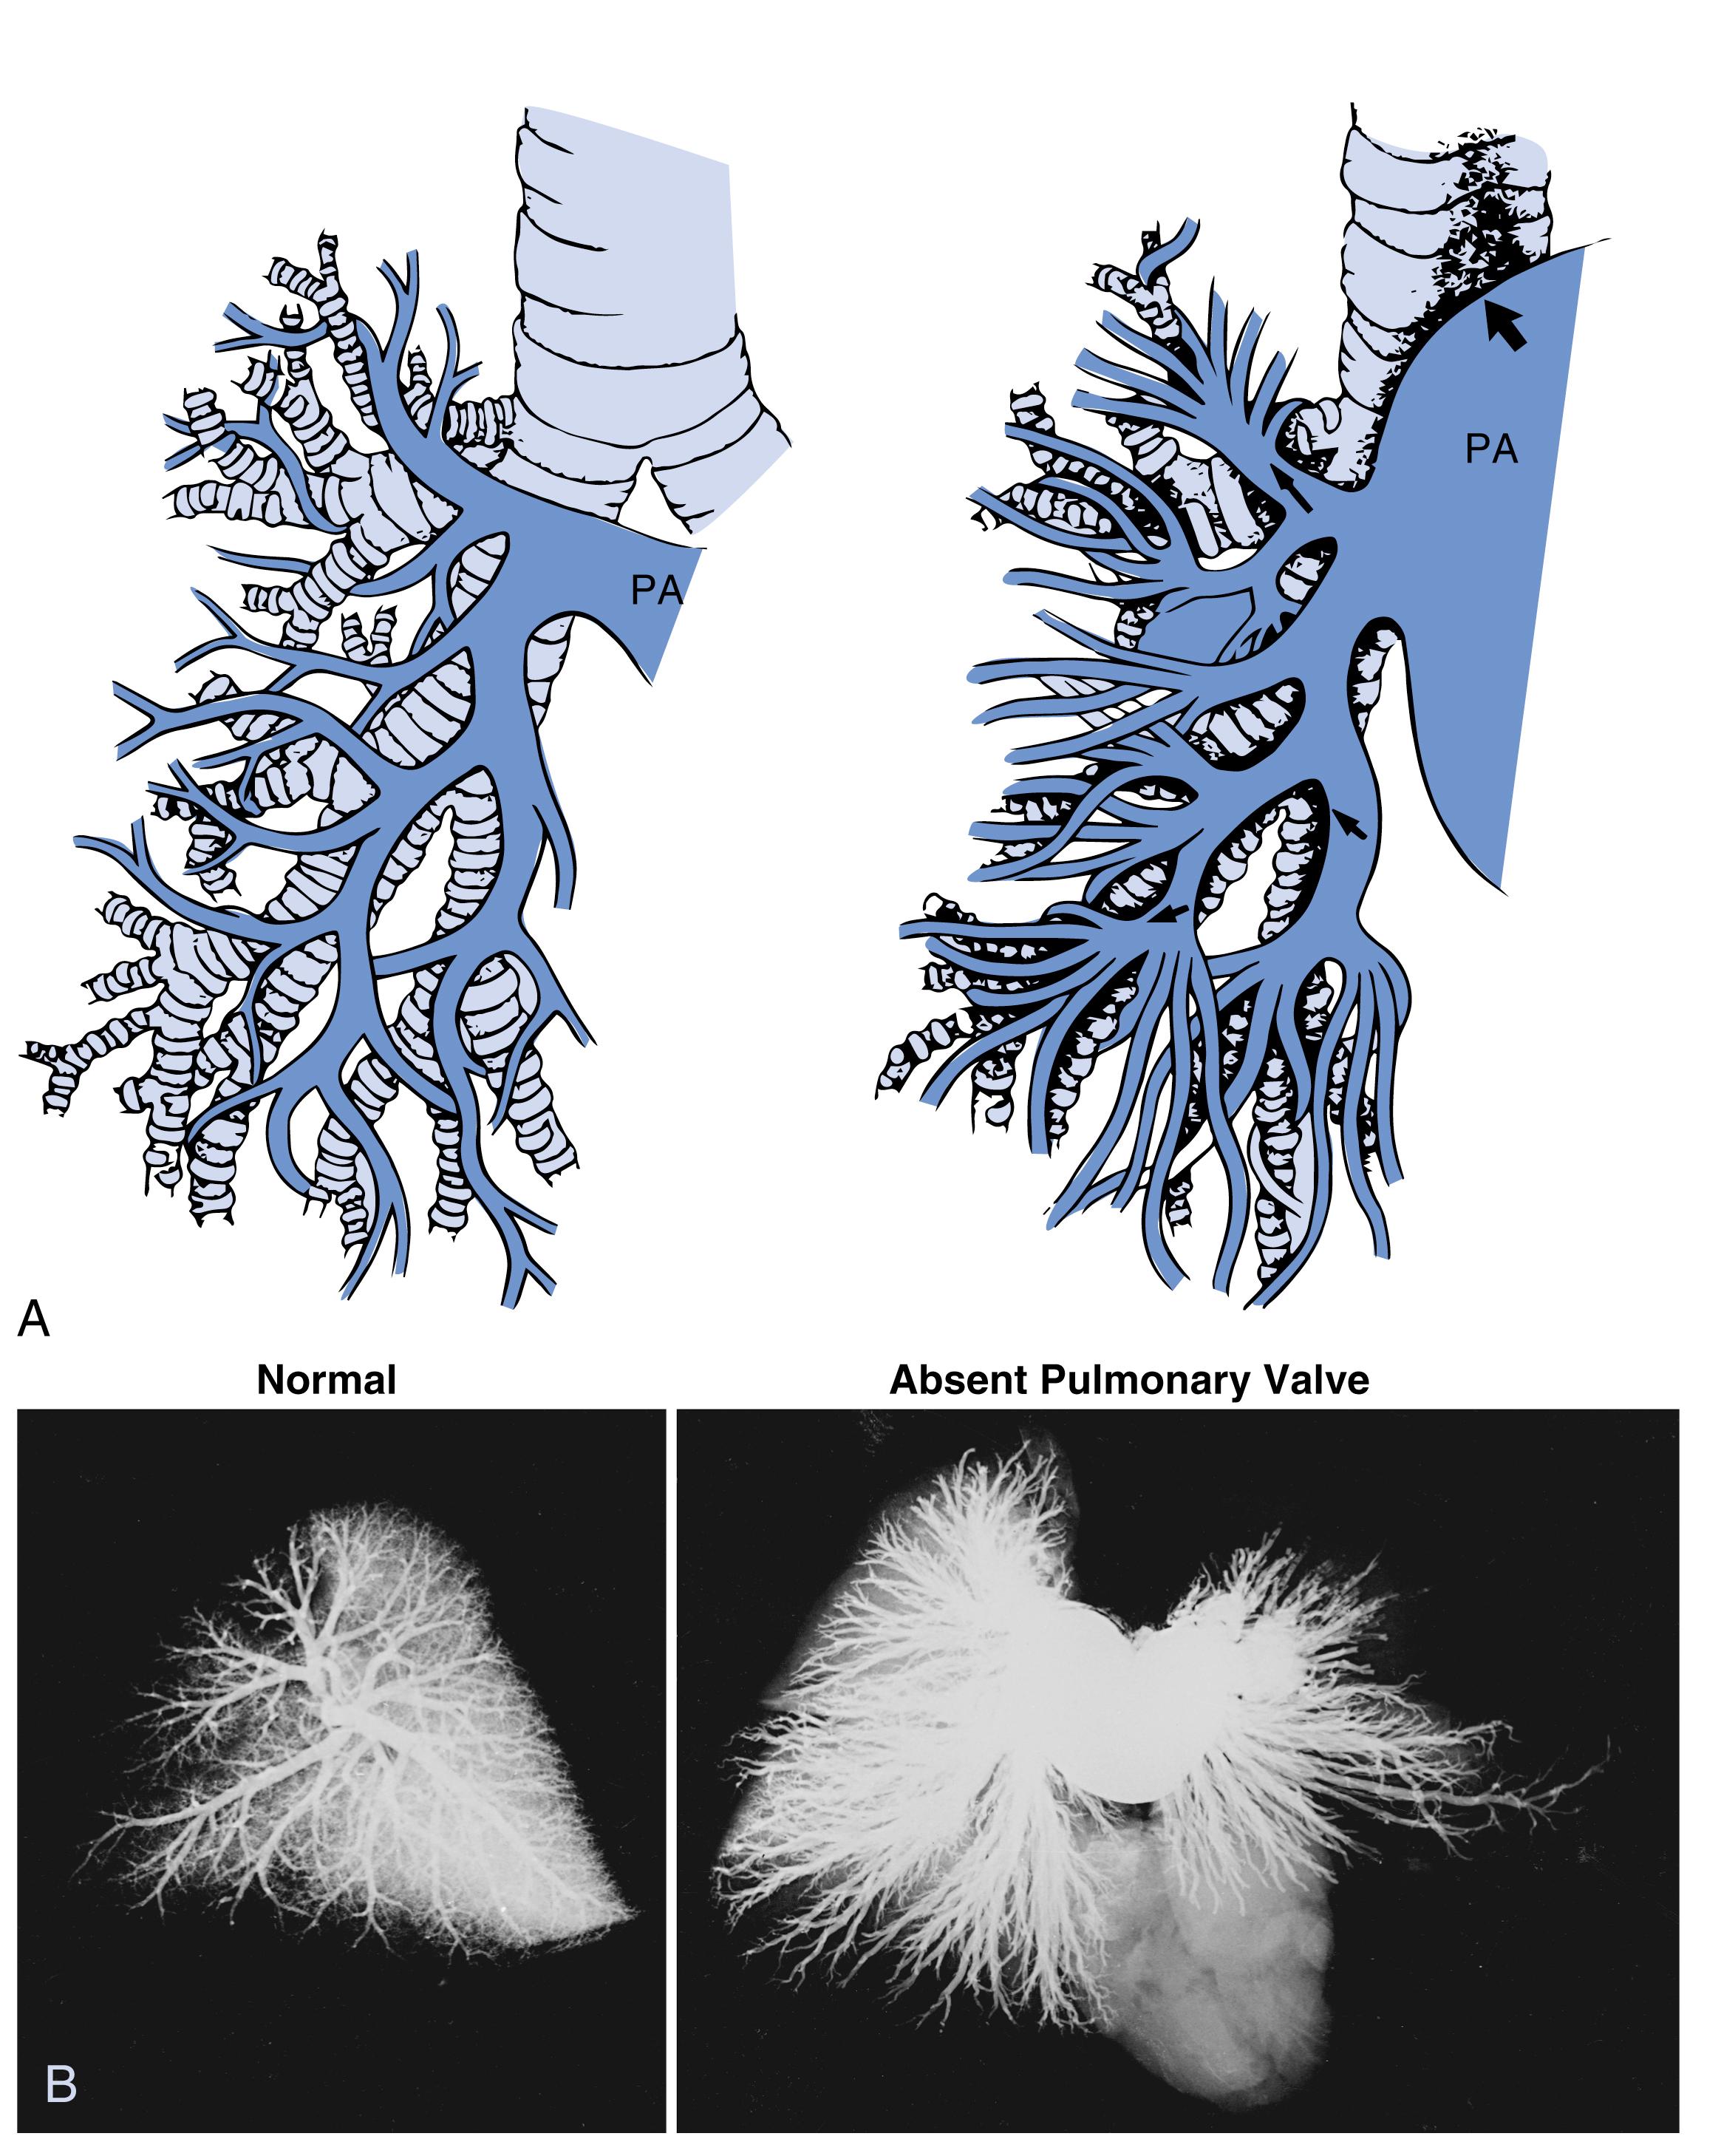 Fig. 47.3, (A) Diagrammatic representation of normal pulmonary artery (PA) branching and the abnormal pattern seen in cases of absent pulmonary valve syndrome—tufts of vessels emerging at the segmental artery level that entwine the bronchi. Arrows denote large right pulmonary artery compressing right mainstem bronchus. (B) Postmortem arteriograms from a 4-day-old normal infant (left) following severe cardiorespiratory failure and from a 4-day-old patient with absent pulmonary valve syndrome associated with a ventricular septal defect and d -transposition of the great arteries (right), showing tufts of vessels in both lungs.